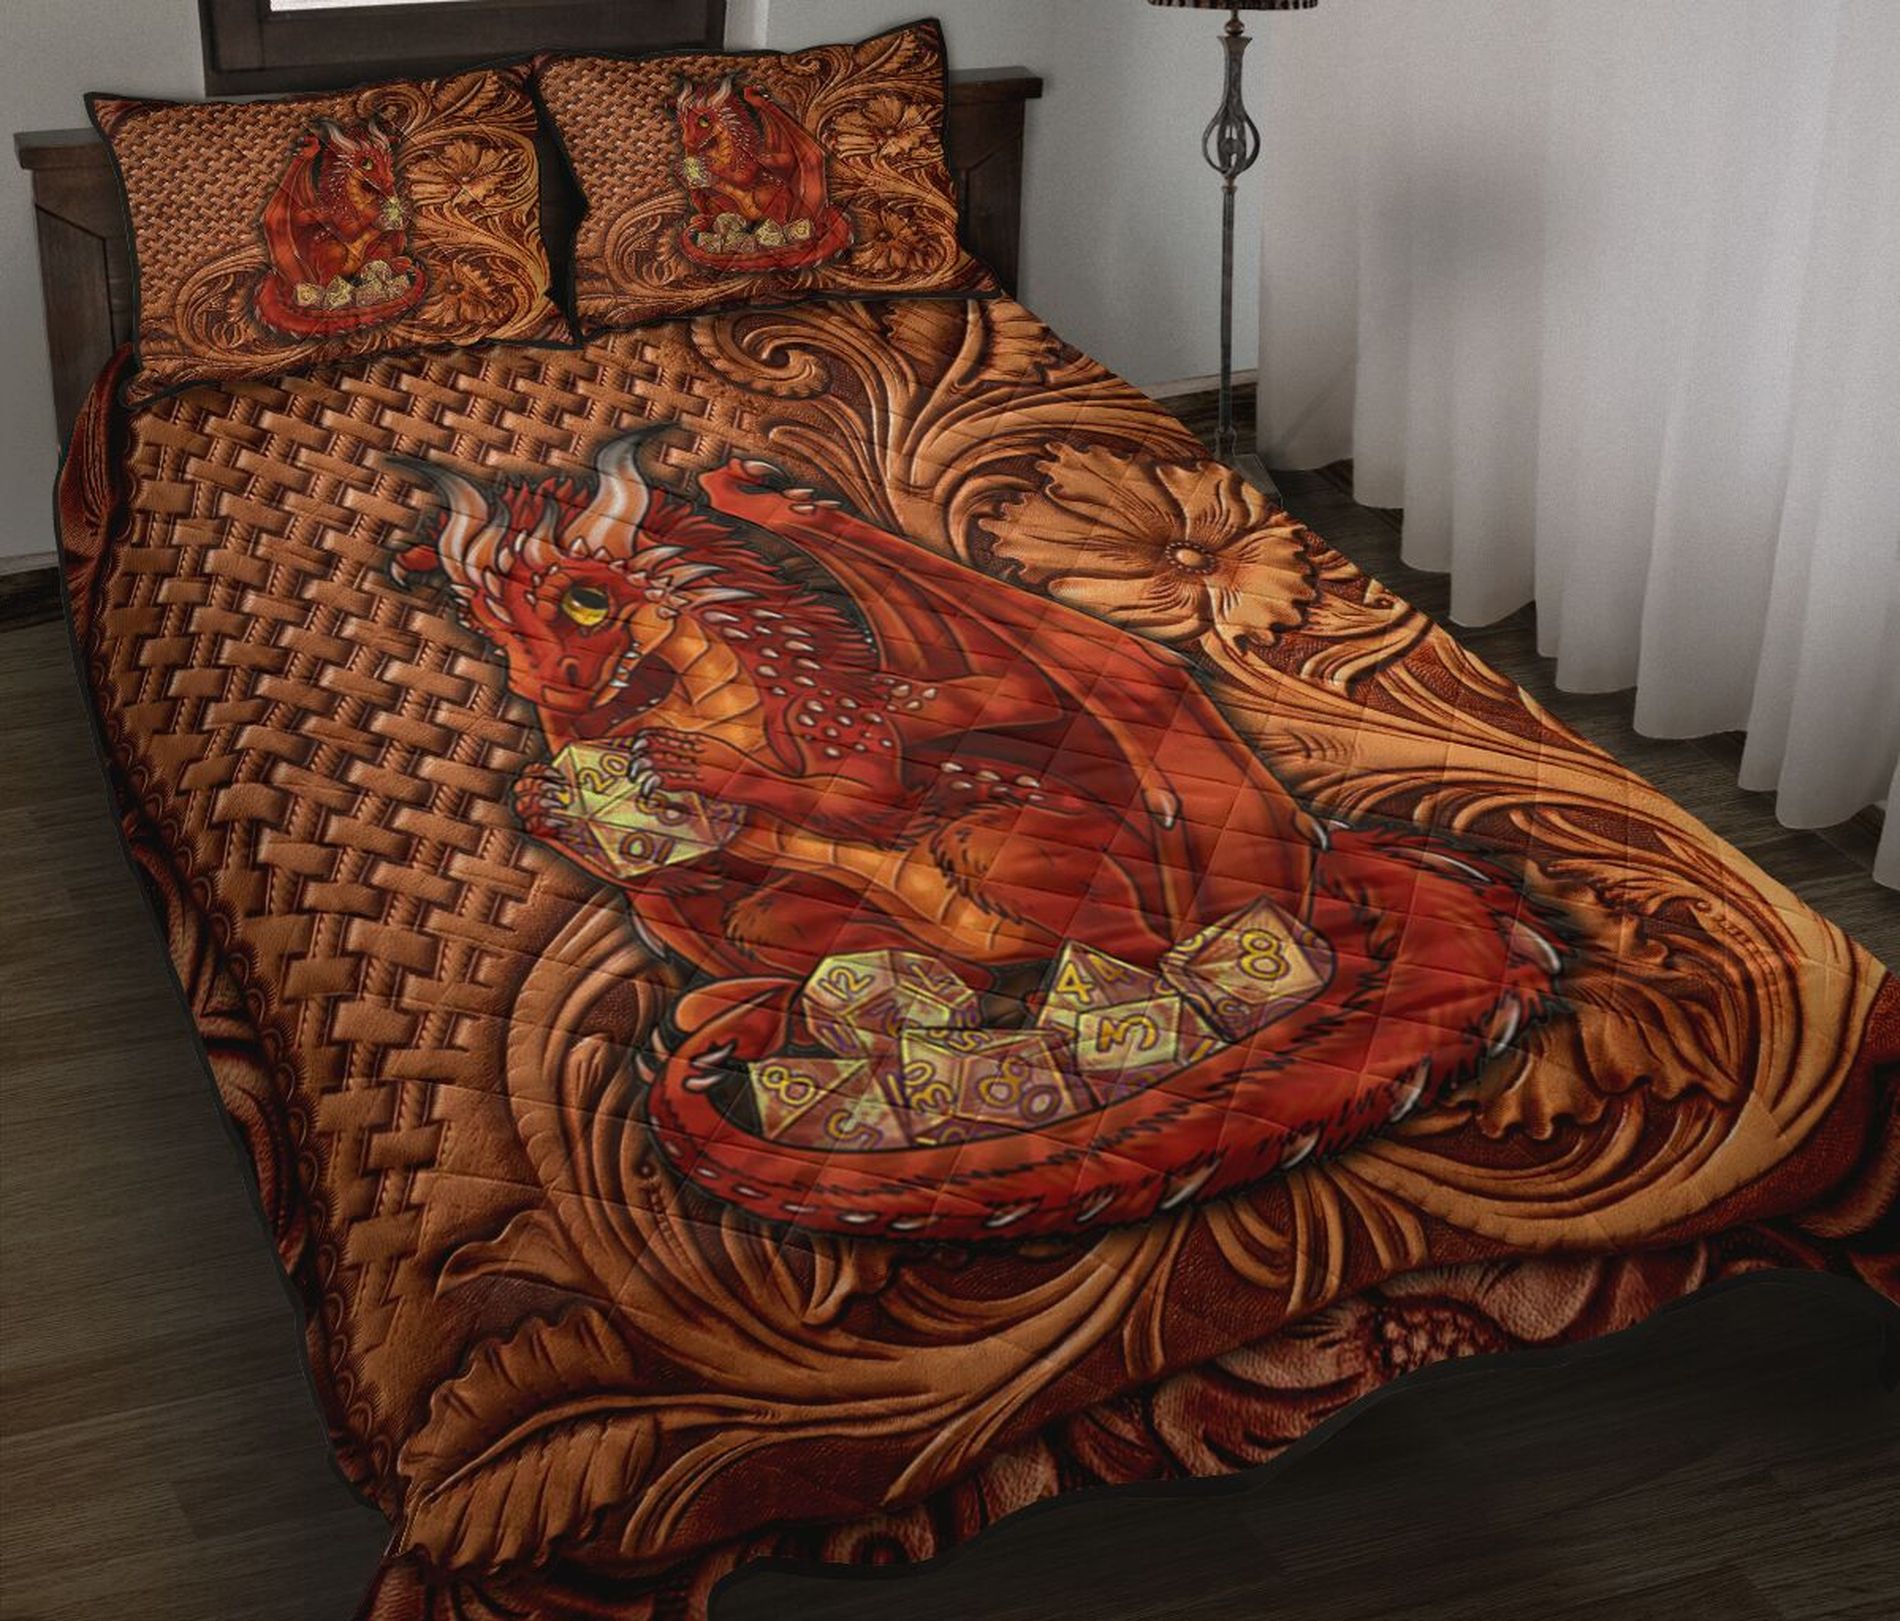 RED DRAGON BED SET